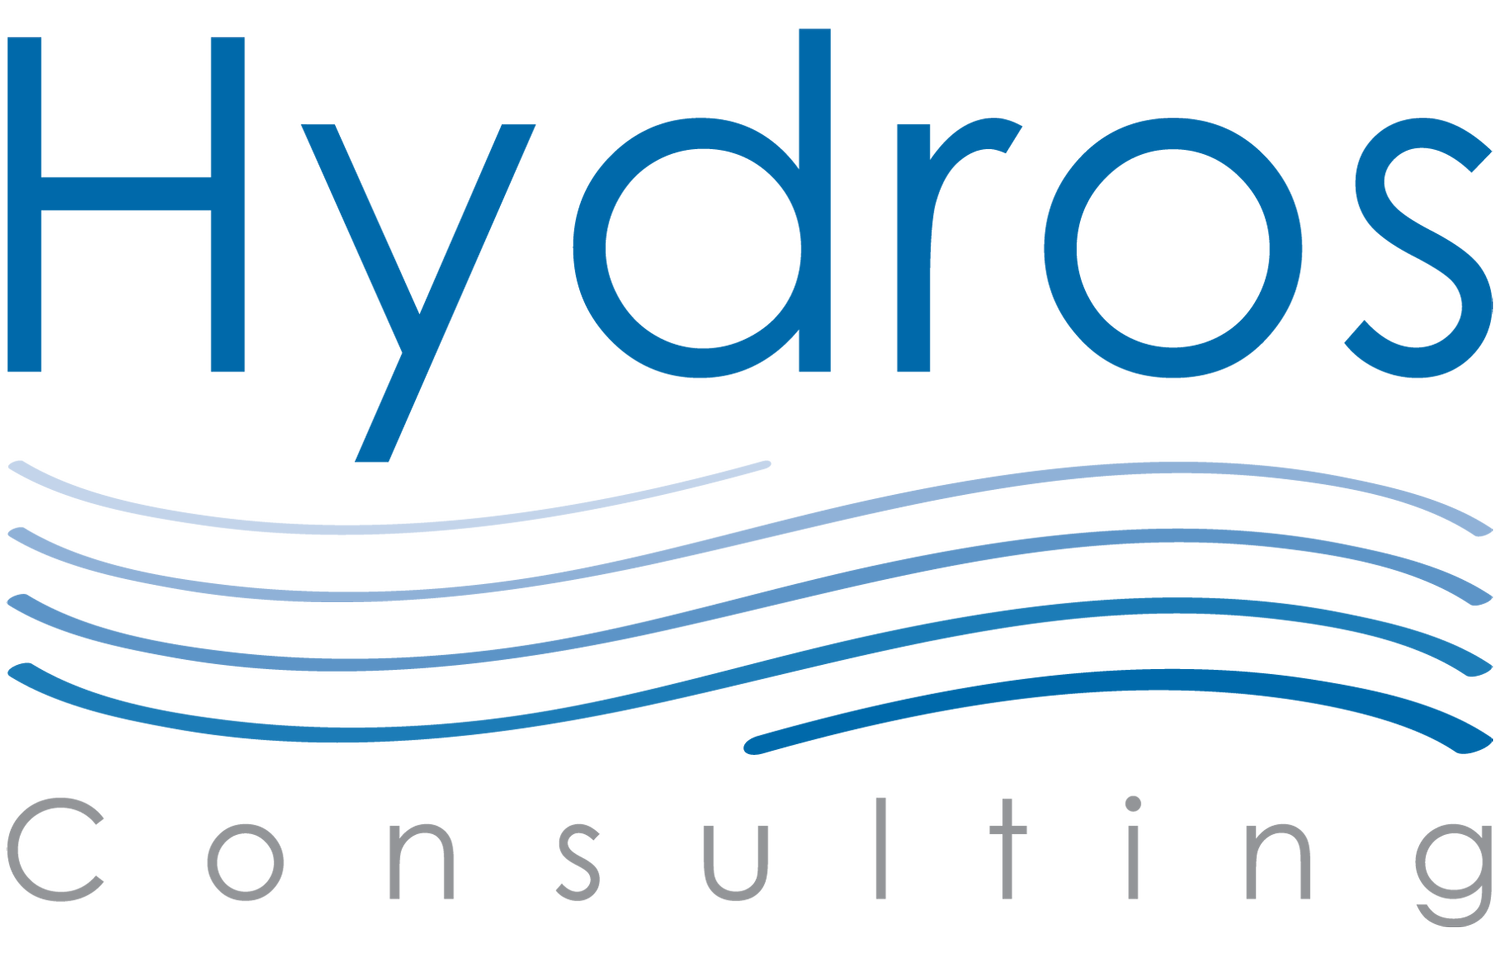 Hydros Consulting